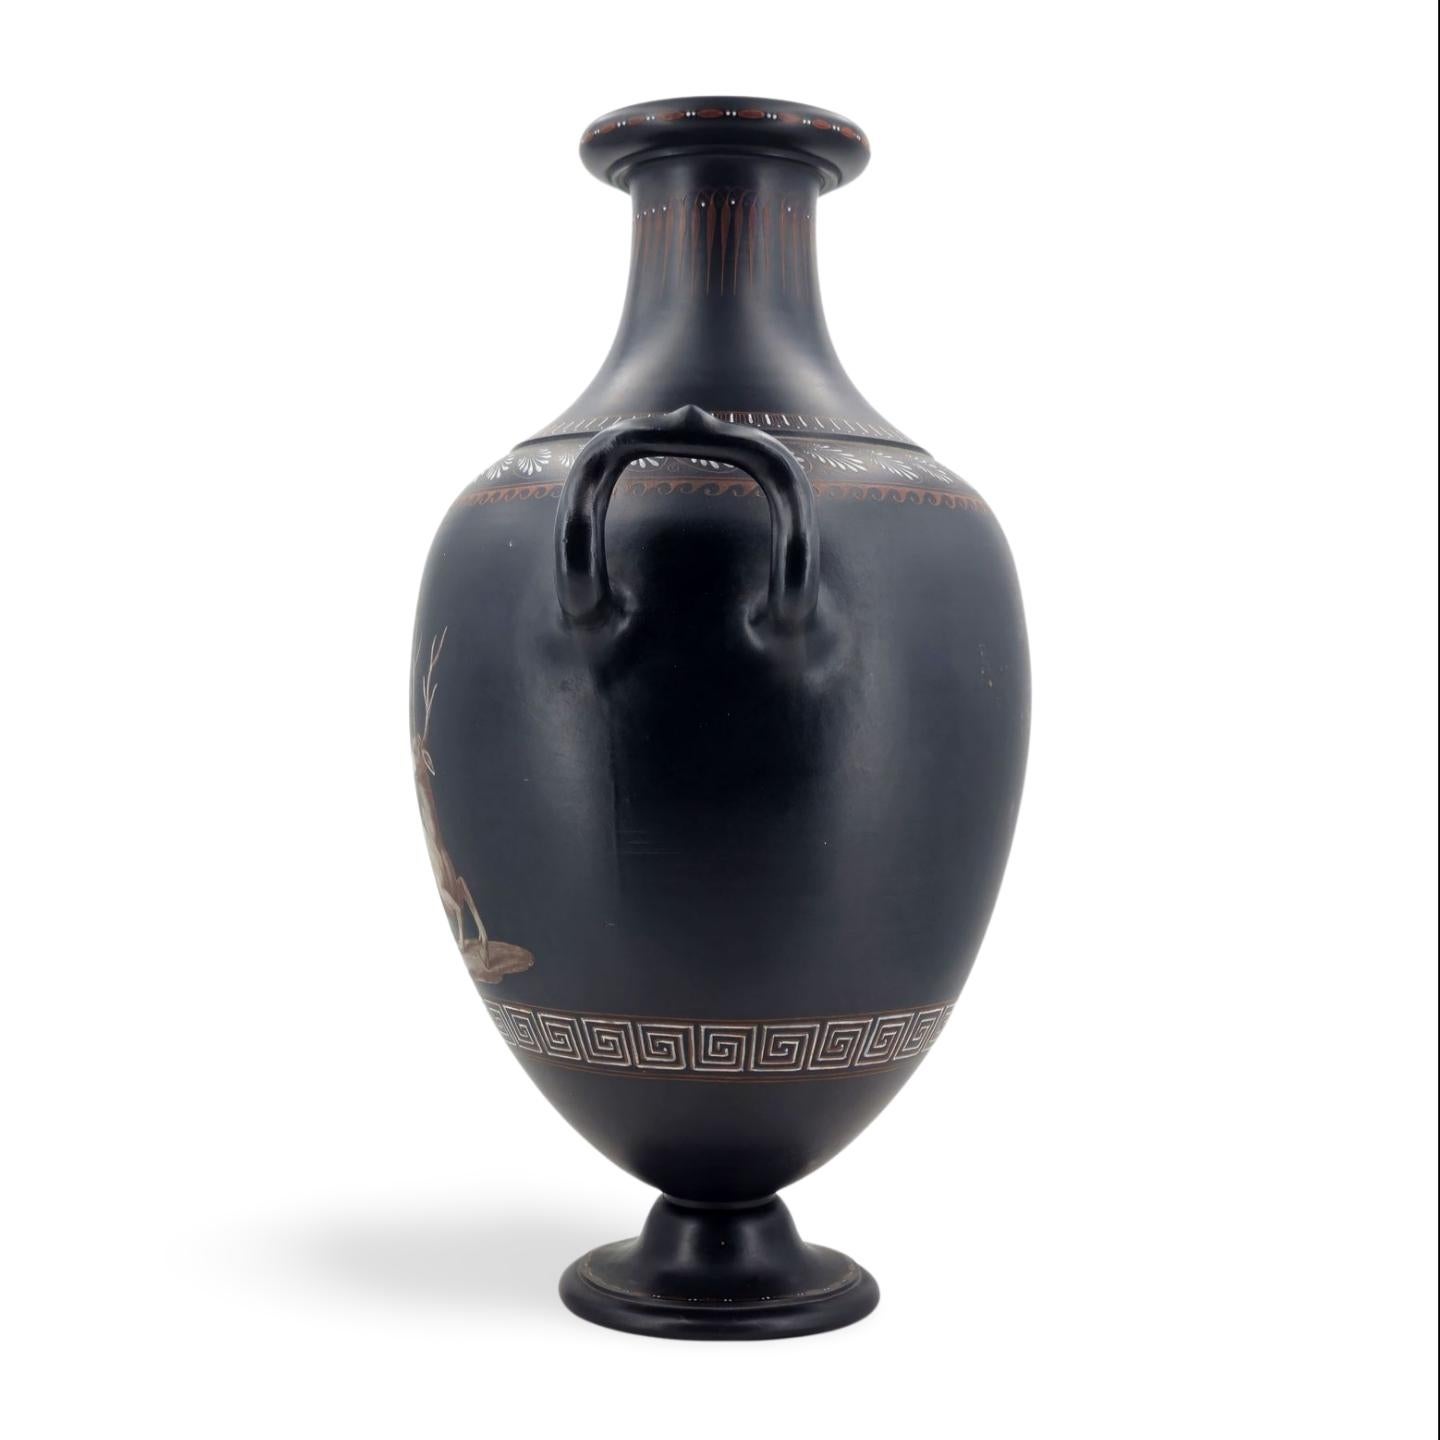 A fine, large vase in black basalt, decorated with an en grisaille painted illustration of Orpheus playing his lyre, with a stag sitting quietly by, listening to his playing - and perhaps singing, although his mouth is shown closed.


Orpheus's